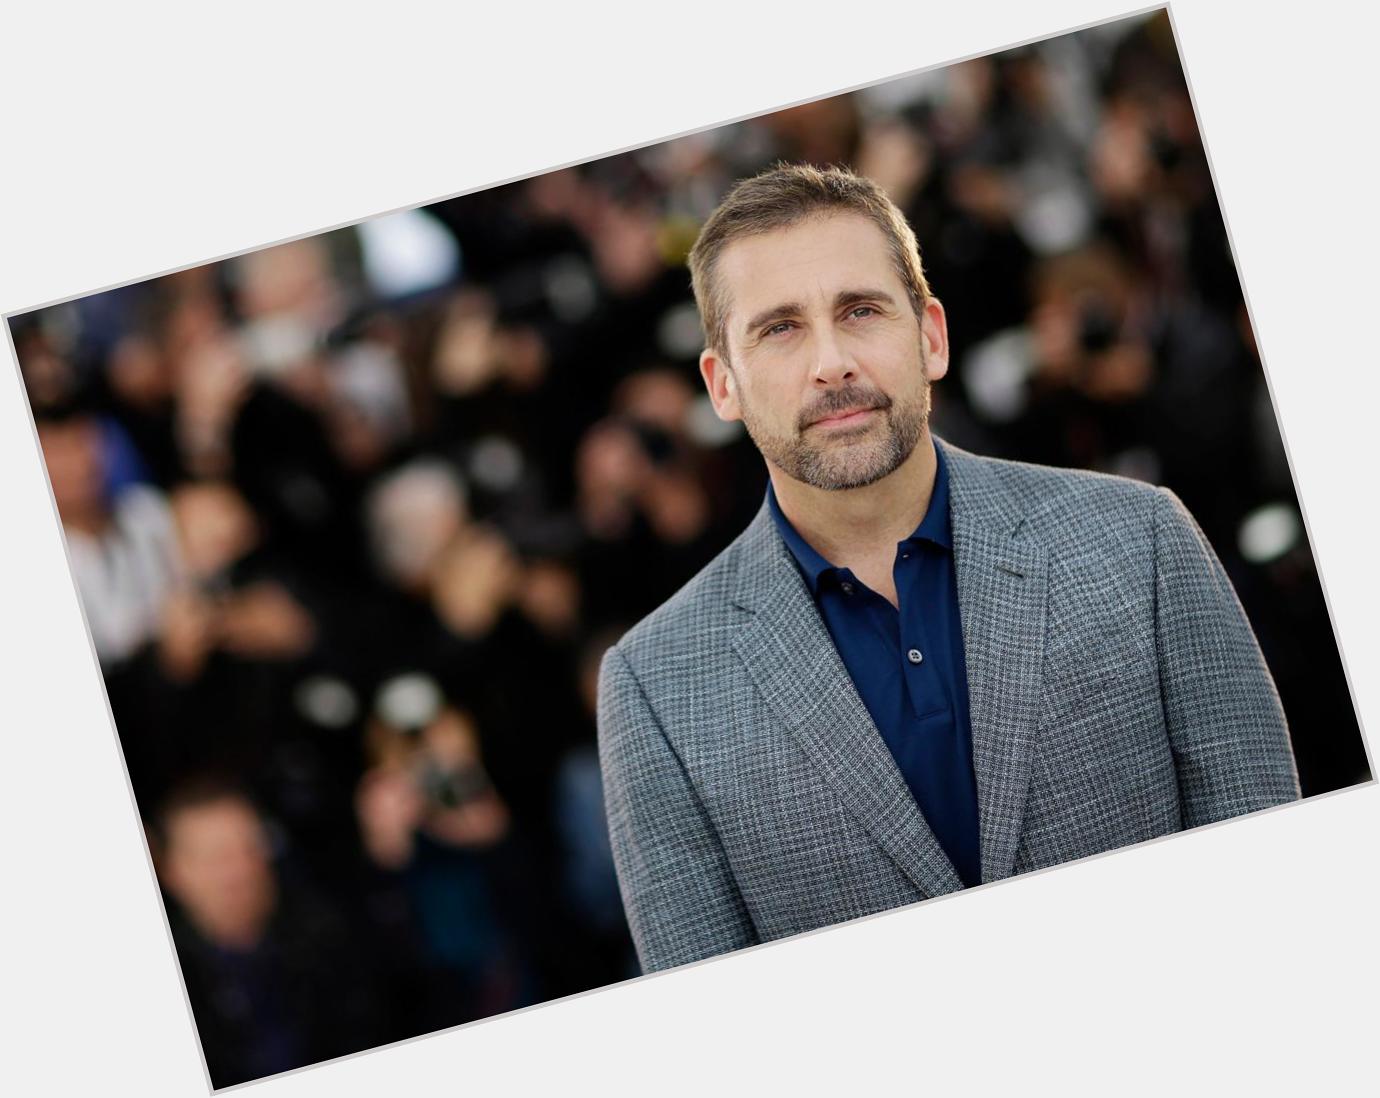 Happy Birthday Steve Carell! 53 today! What\s your favourite movie of his? - 